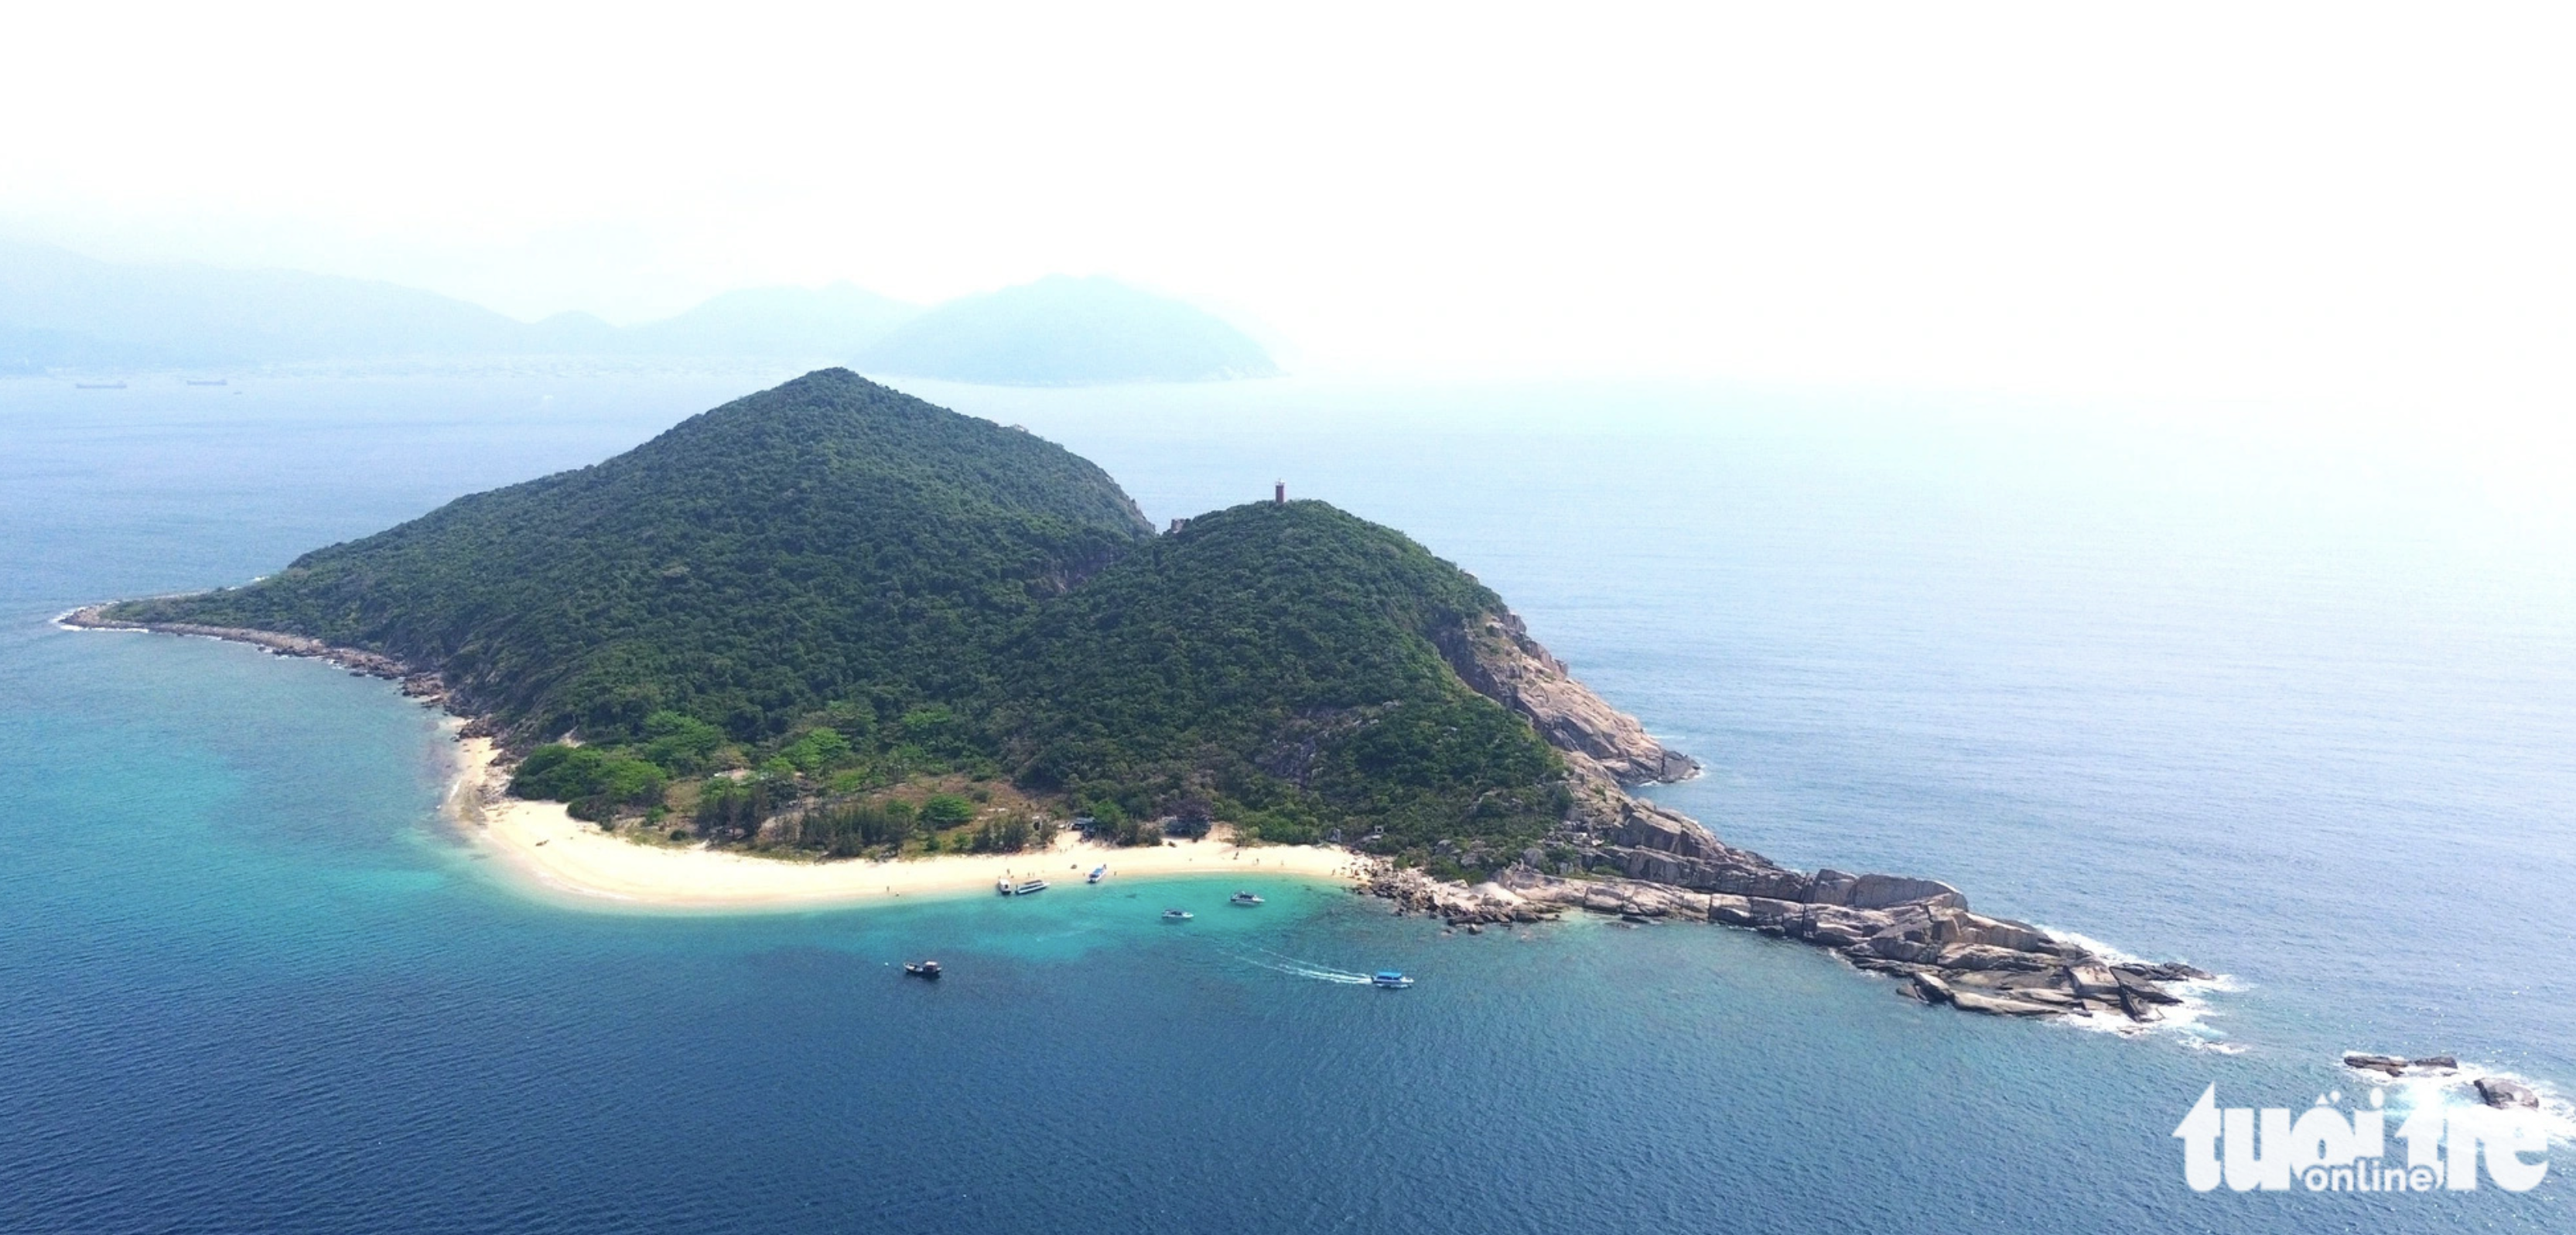 A bird’s-eye view of Hon Nua Island off Phu Yen and Khanh Hoa Provinces in south-central Vietnam. The island is thought to be in the shape of a dinosaur. Photo: Nguyen Hoang / Tuoi Tre